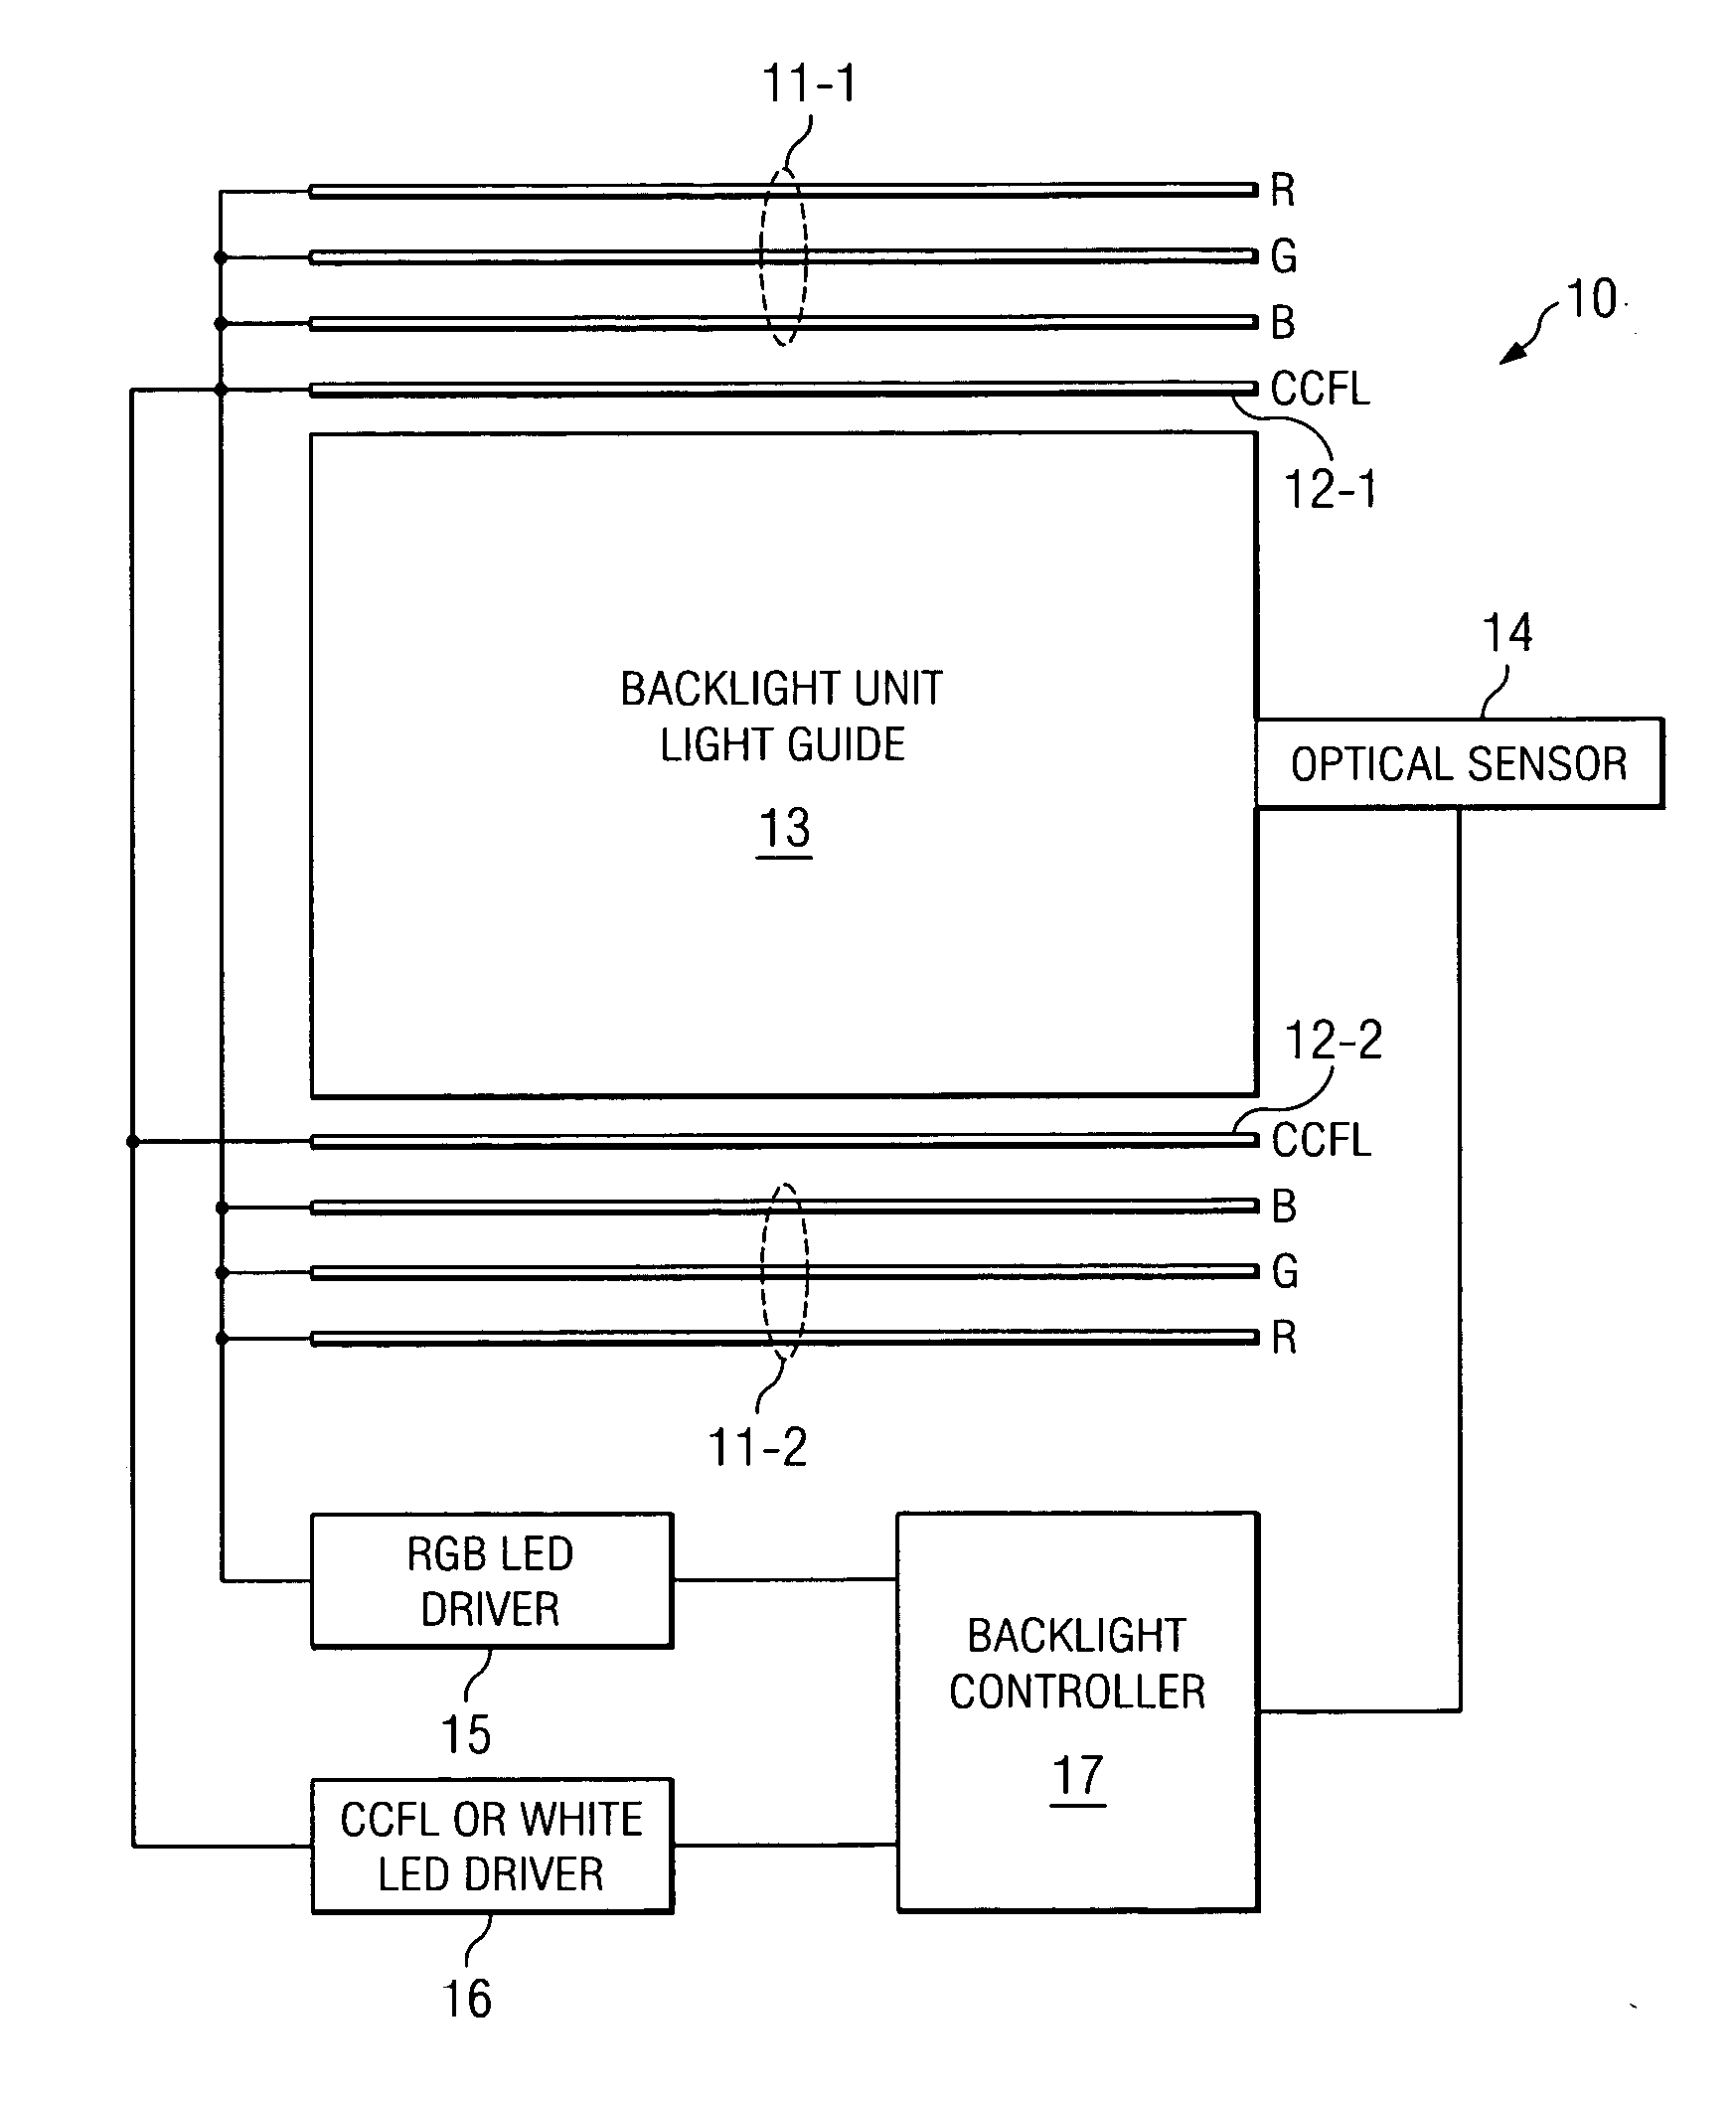 System and method for constructing a backlighted display using dynamically optimized light source